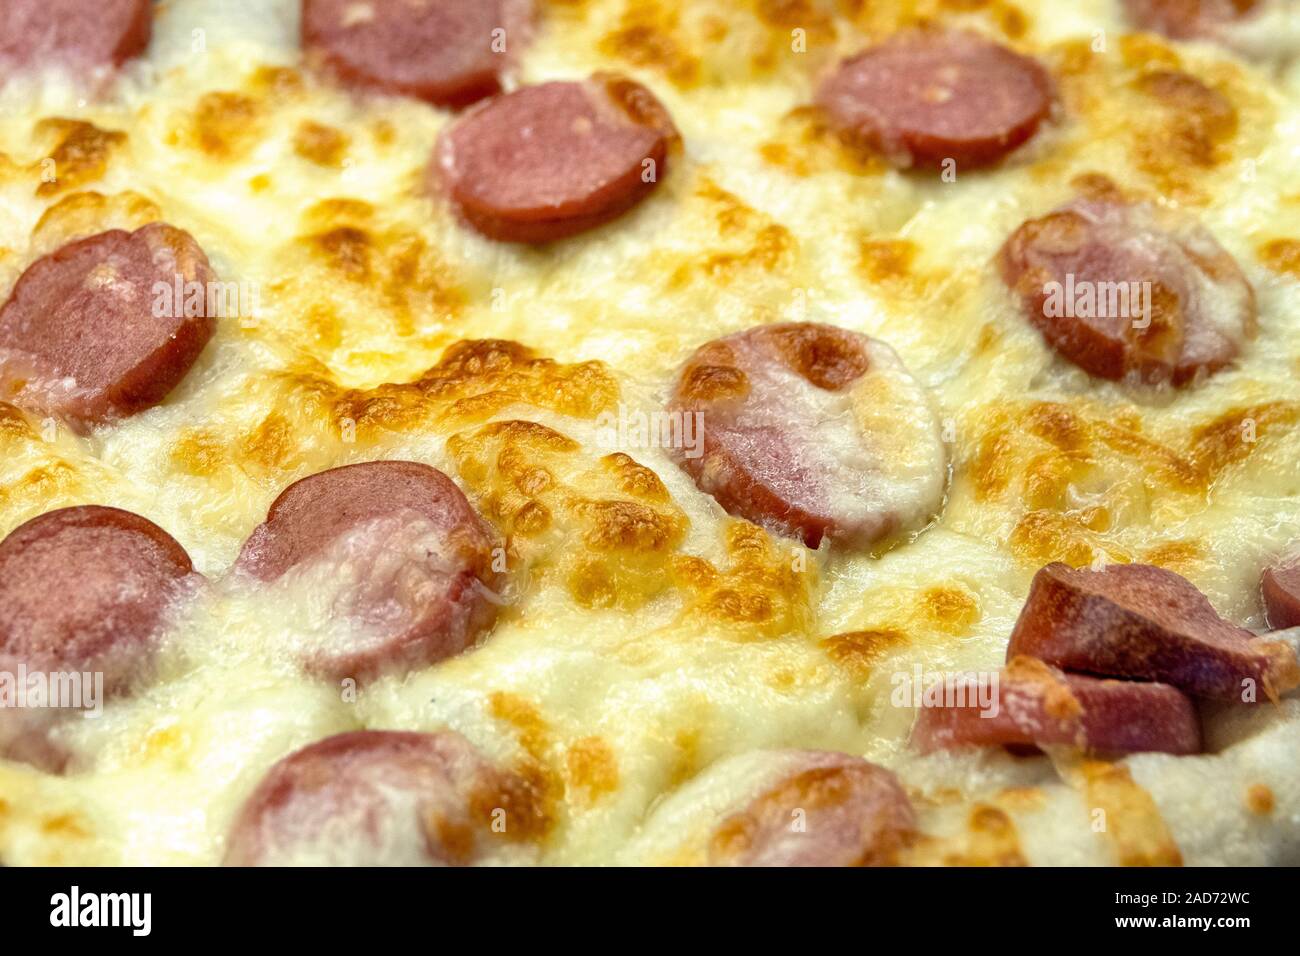 Close up shot of a pizza with Frankfurt sausage Stock Photo